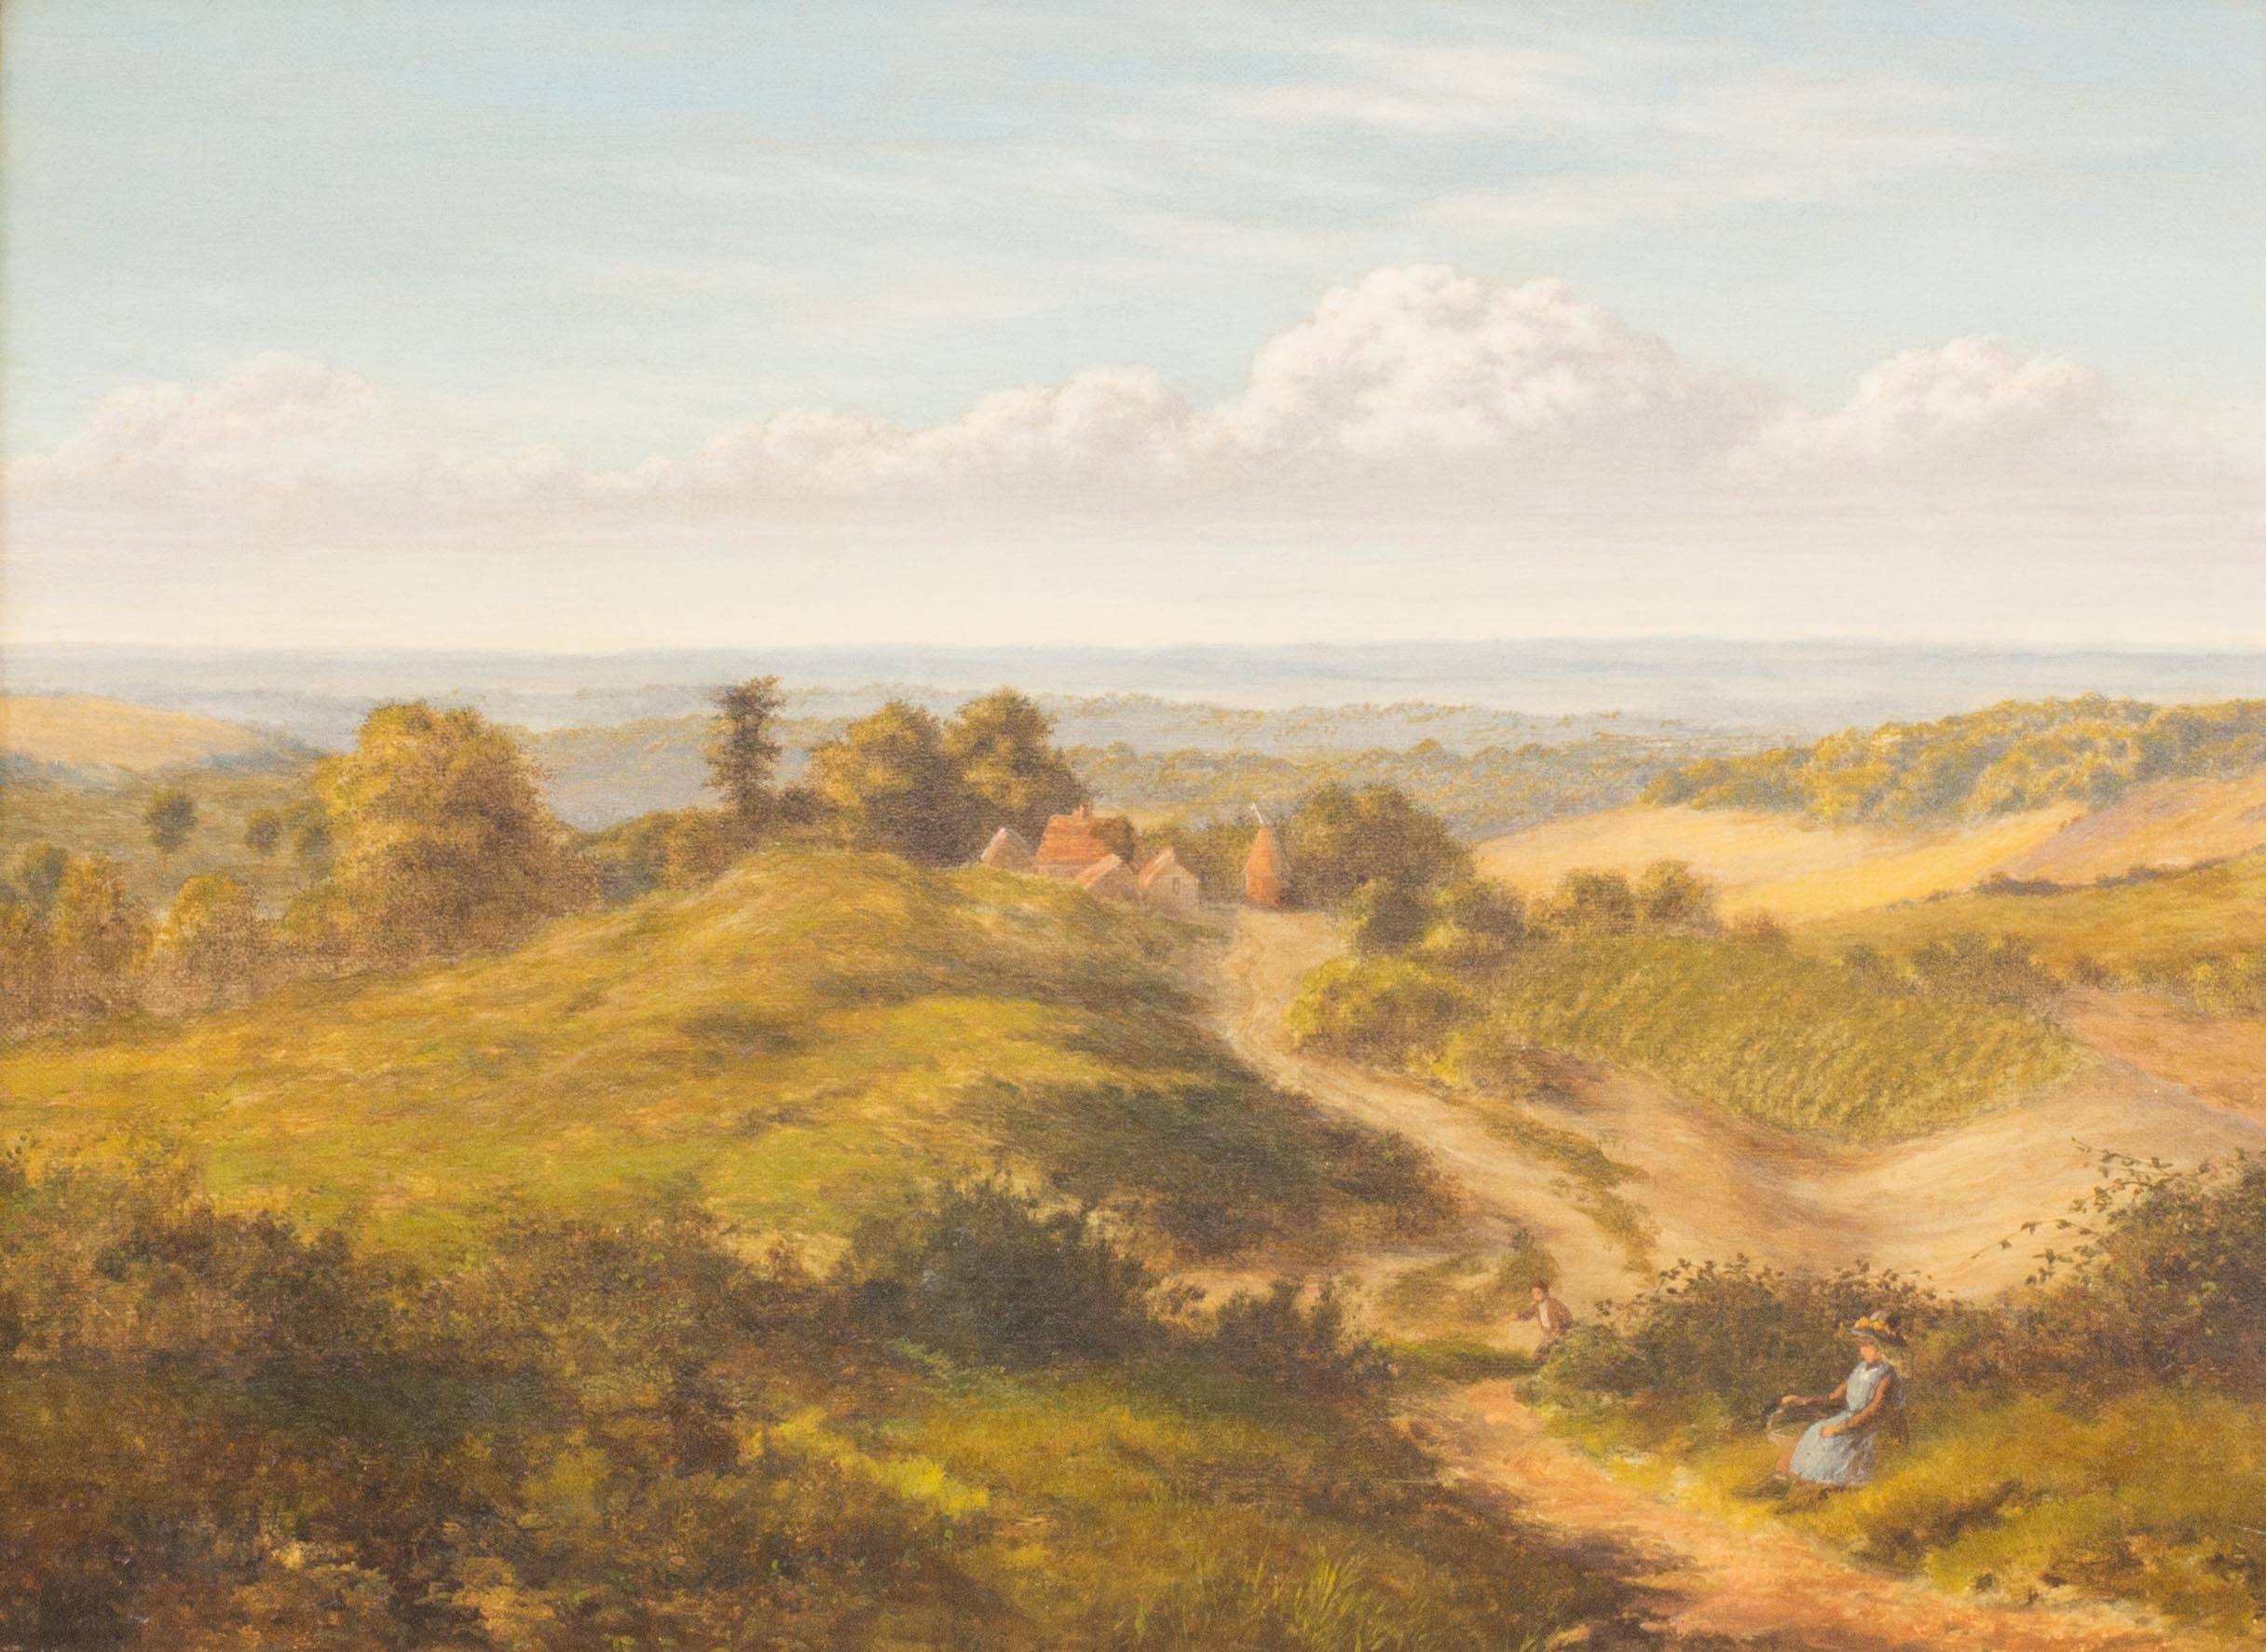 The Weald of Kent - Victorian Painting by Horace Walter Gilbert